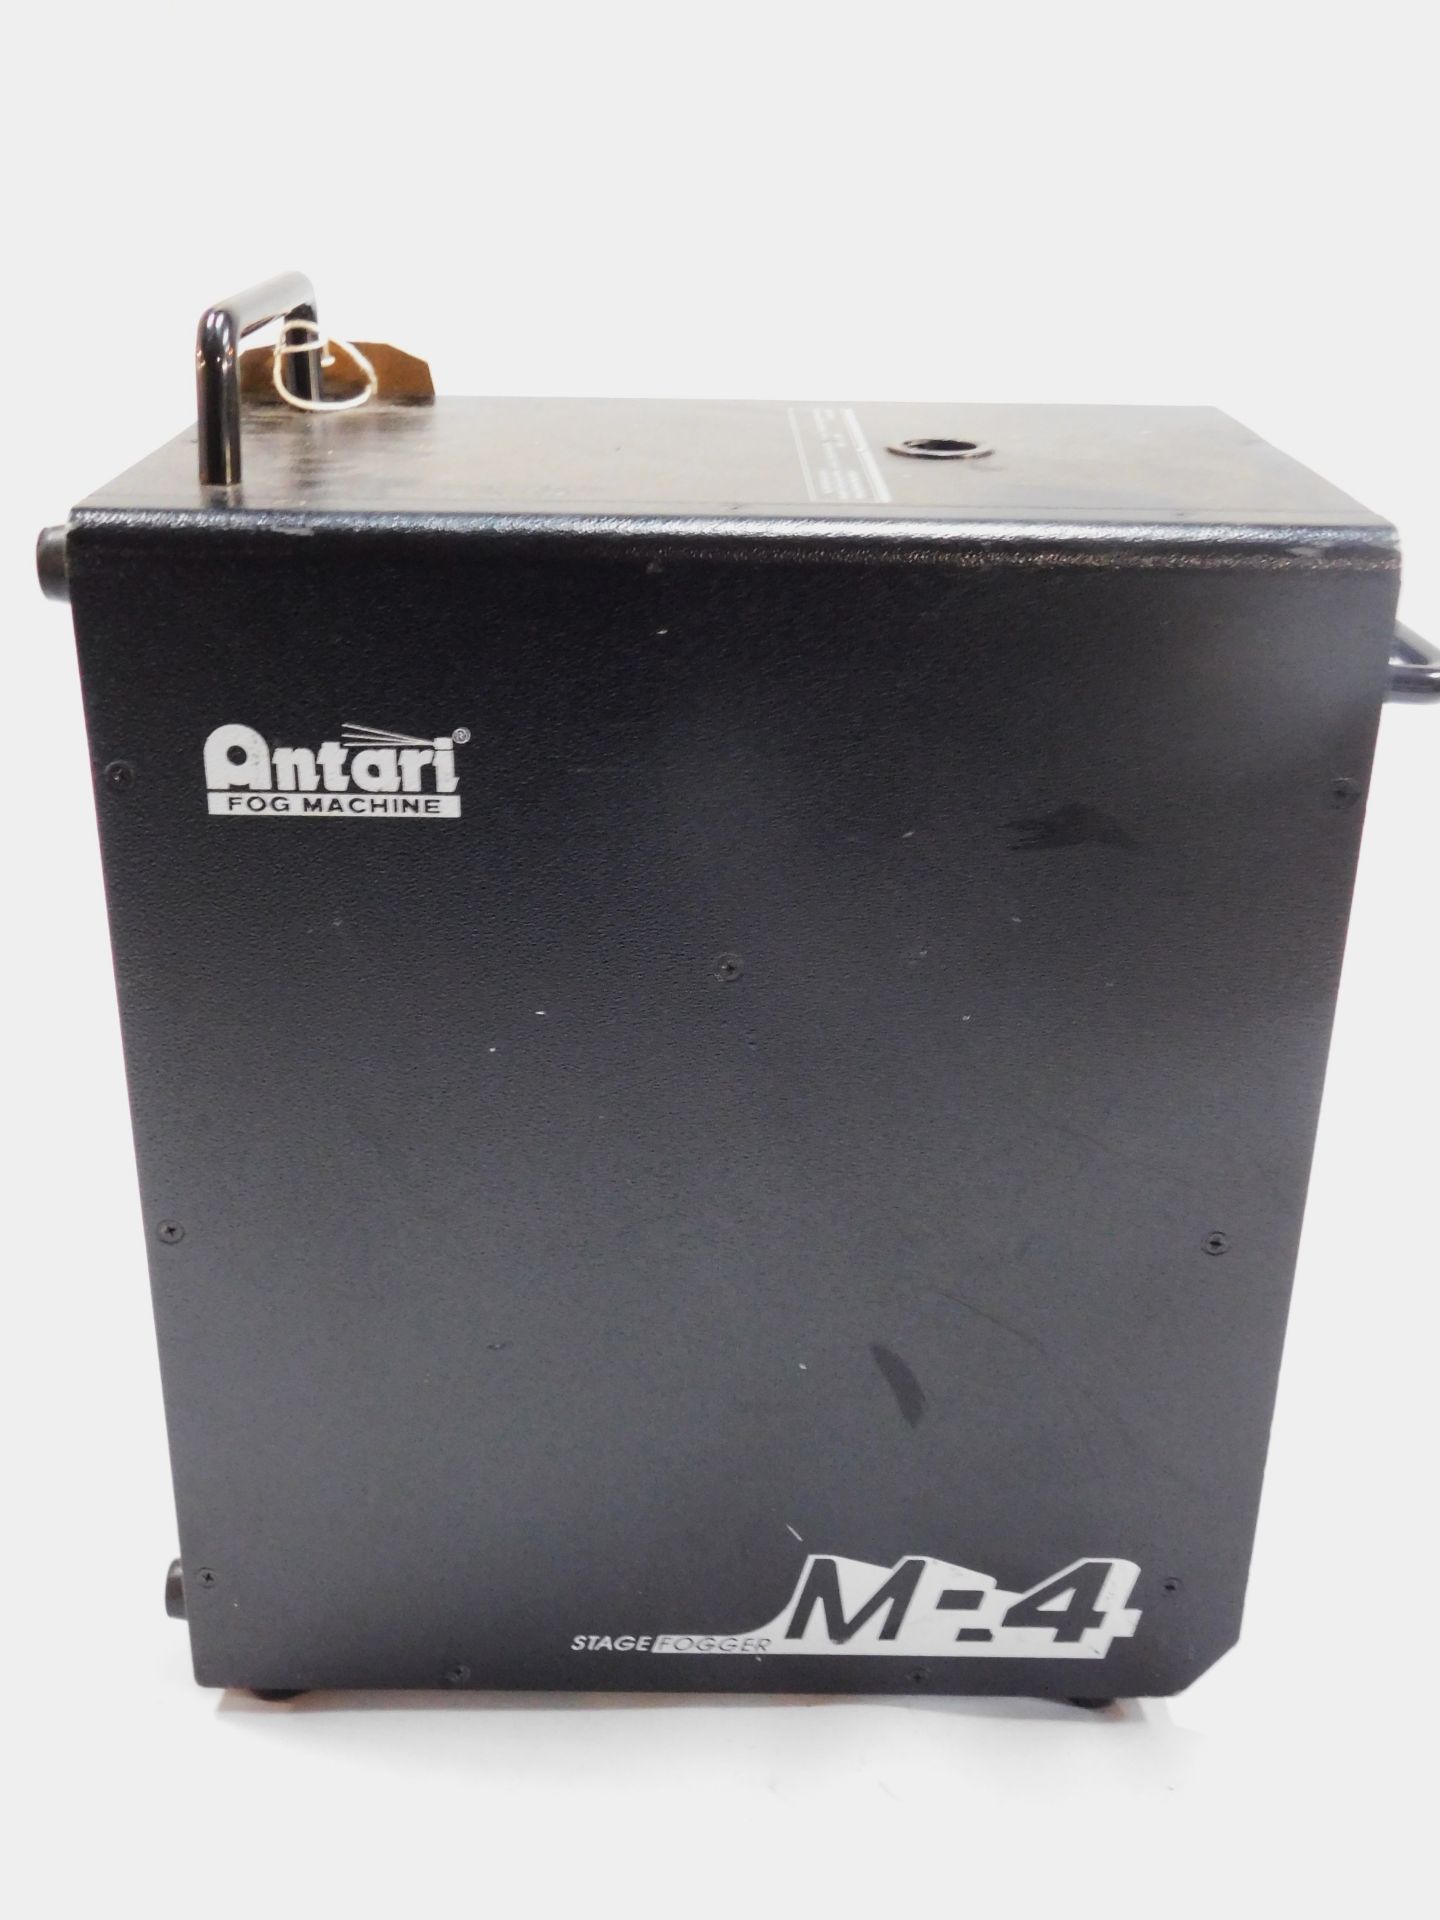 Antari M-4 Fog Machine, Serial Number M4000E11140012 (Location: Brentwood. Please Refer to General - Image 2 of 4